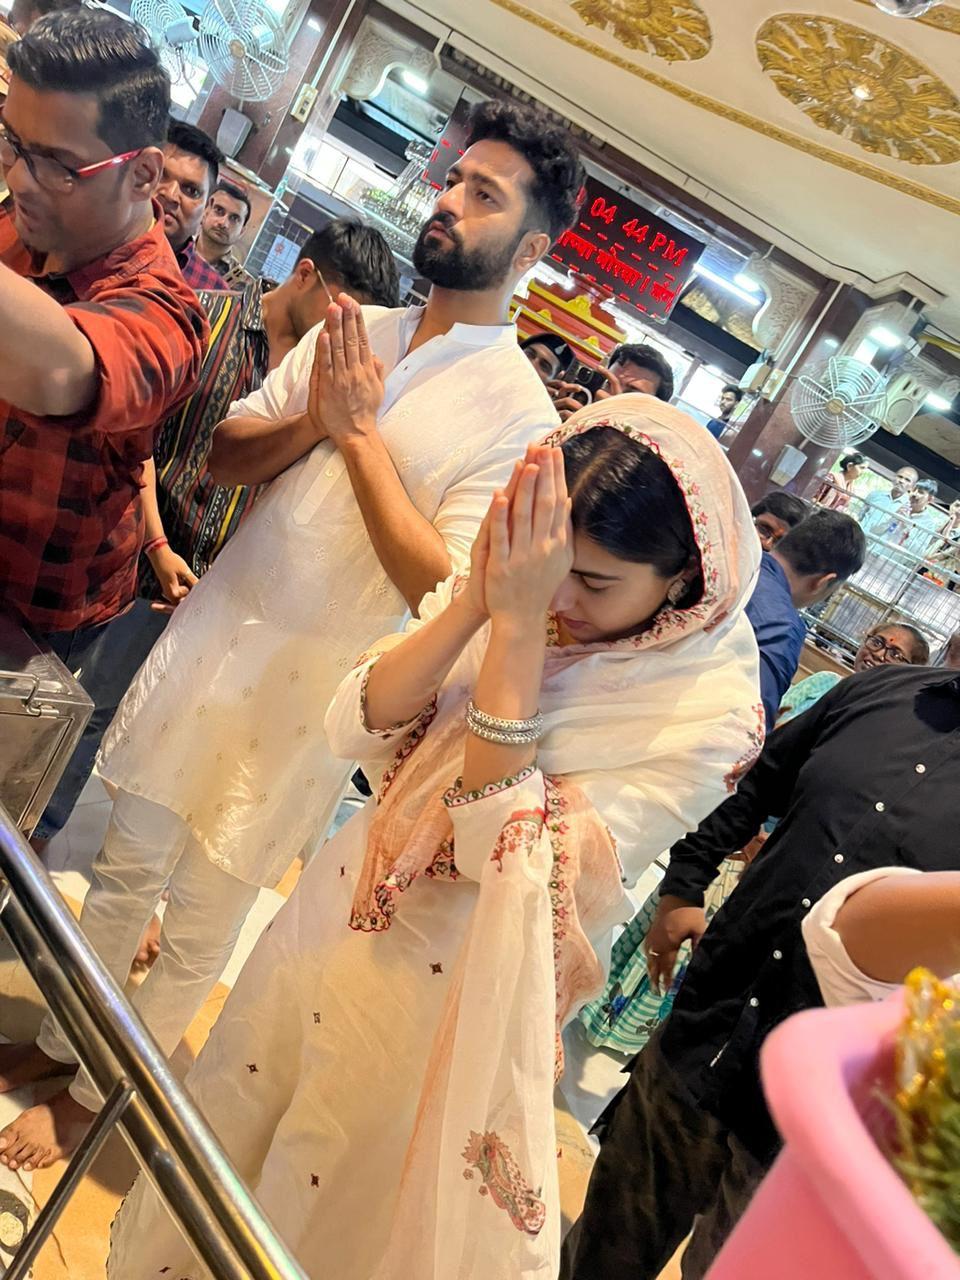 Sara Ali Khan and Vicky Kaushal were seen dressed in ethnic clothes, seeking the Lord's blessings at the Siddhivinayak temple.